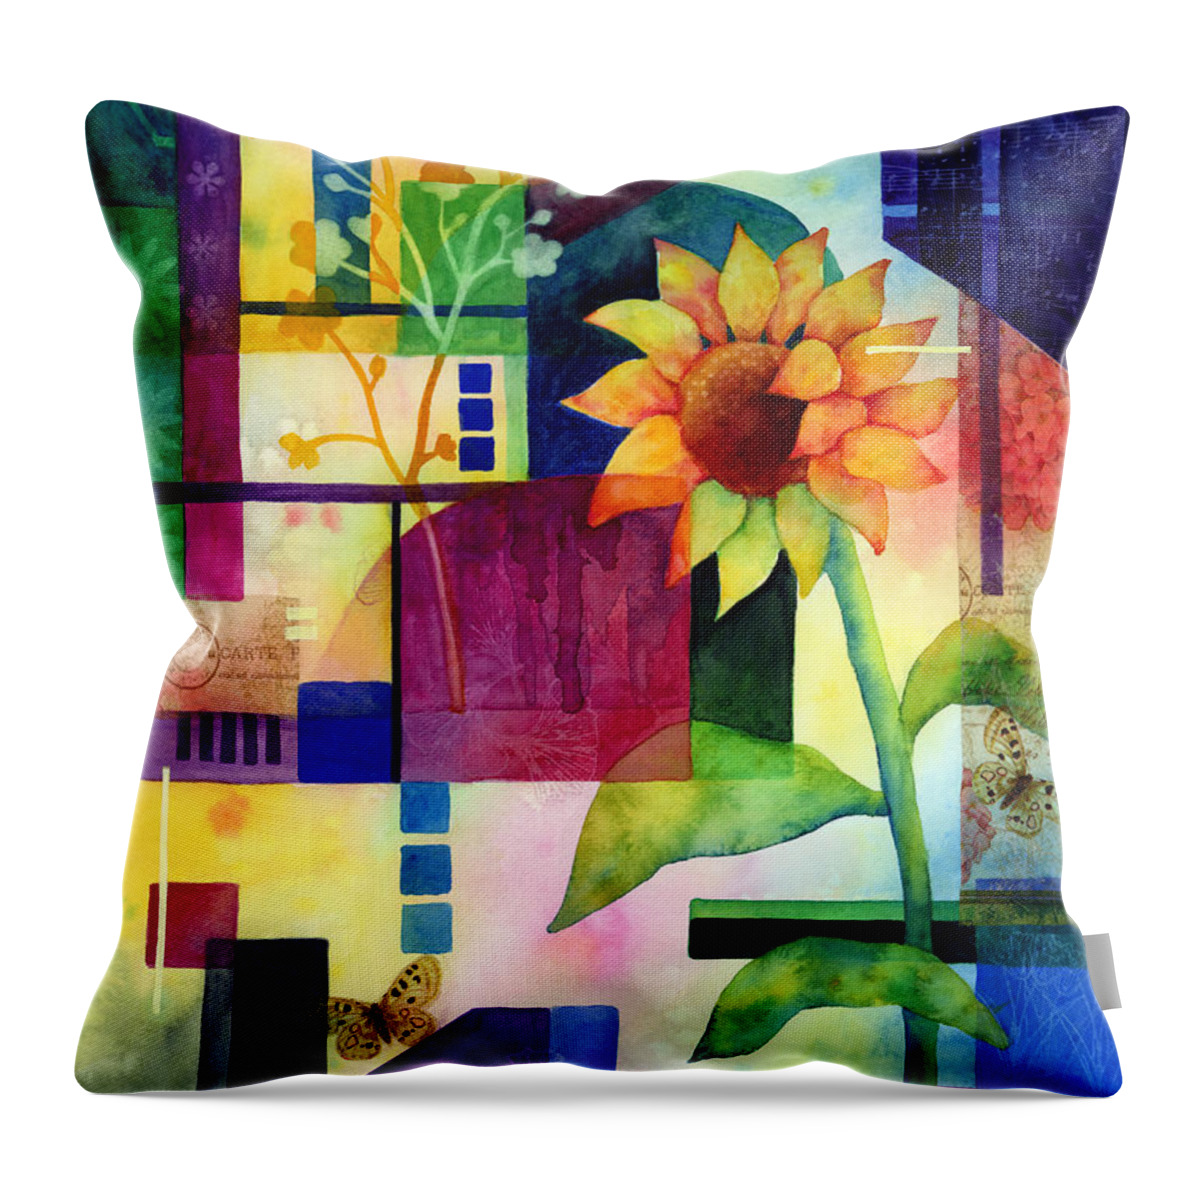 Sunflower Throw Pillow featuring the painting Sunflower Collage 2 by Hailey E Herrera